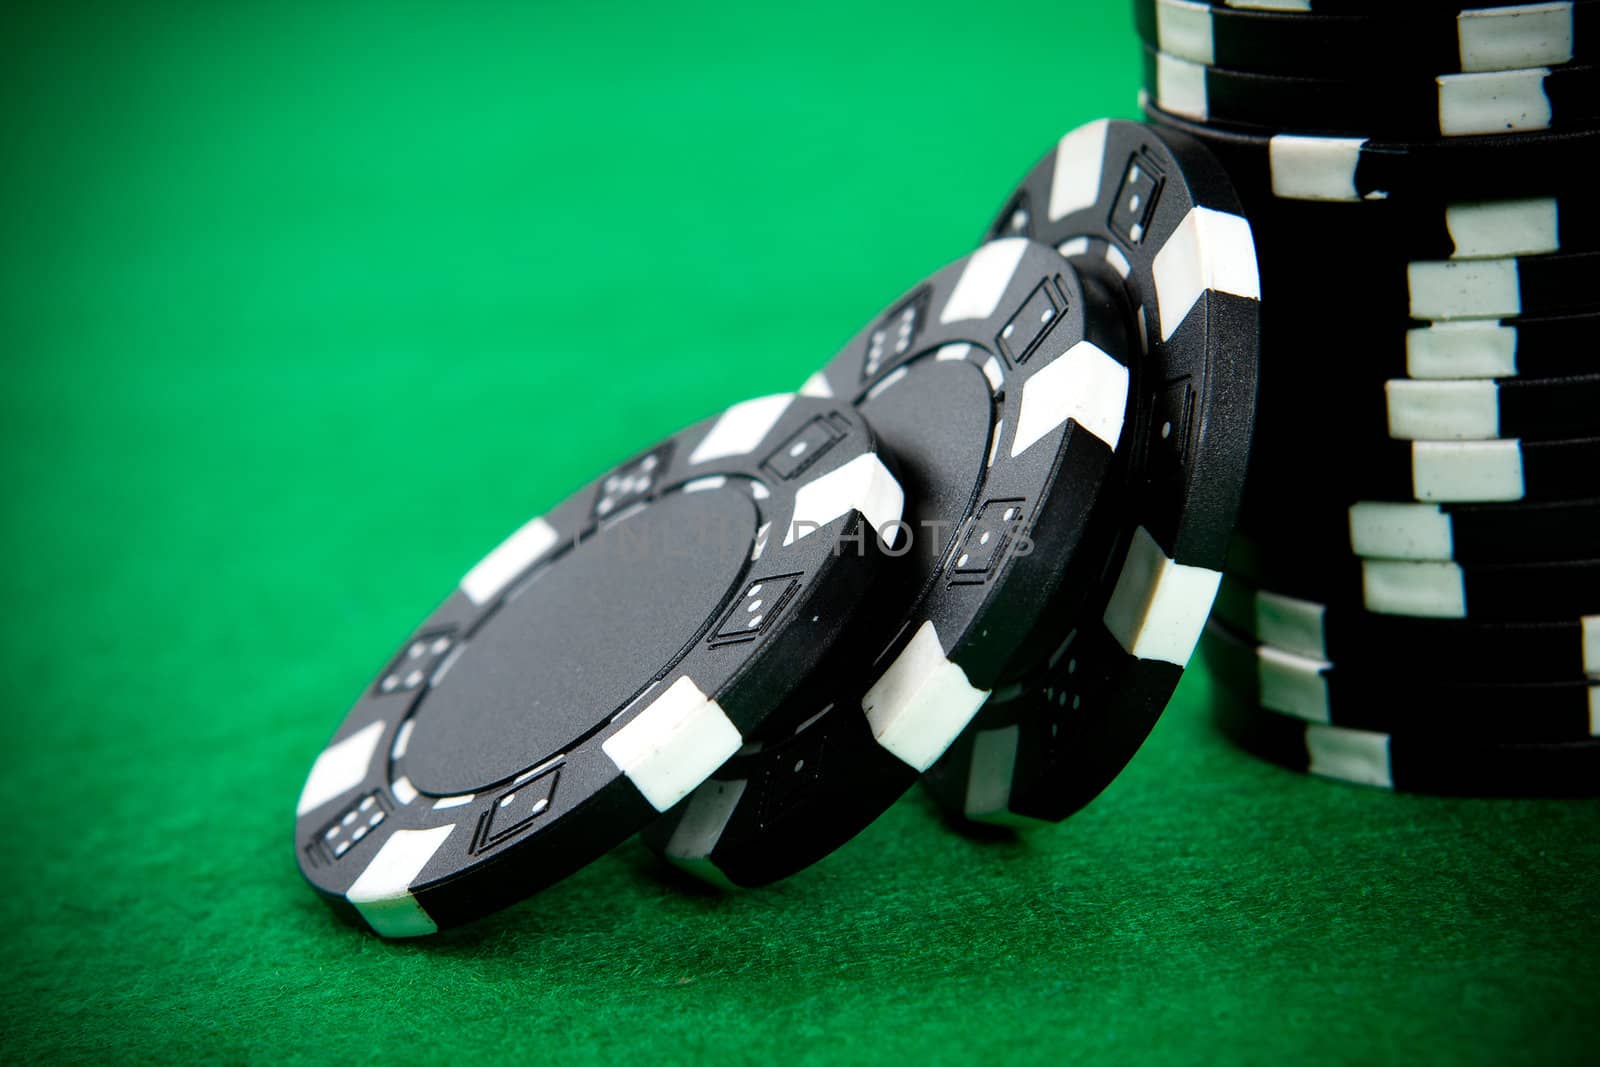 Stack of black poker chips on a green poker table background.